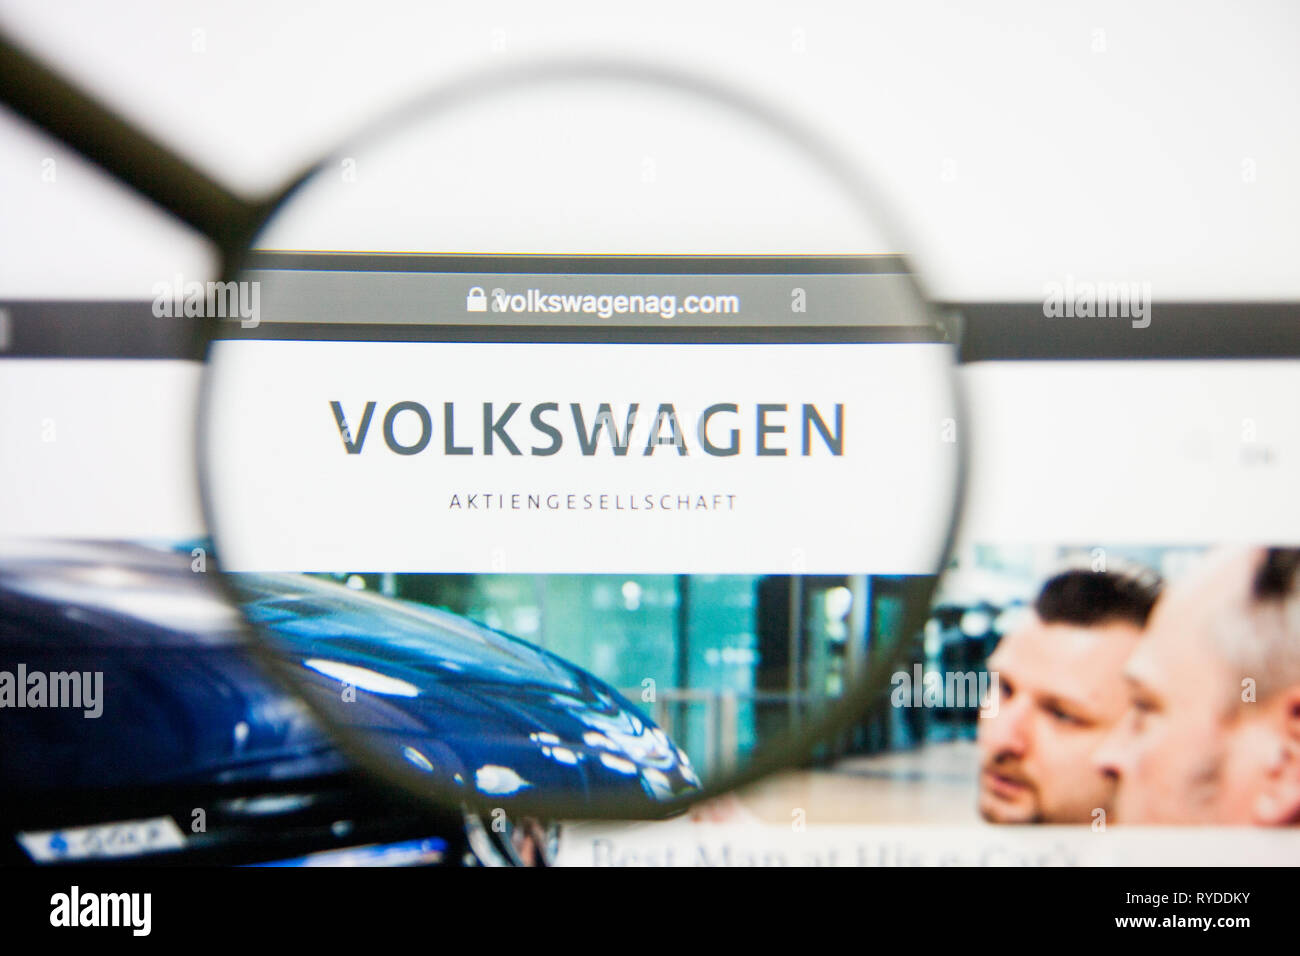 Los Angeles, California, USA - 14 February 2019: Volkswagen Group website homepage. Volkswagen Group logo visible on screen. Stock Photo